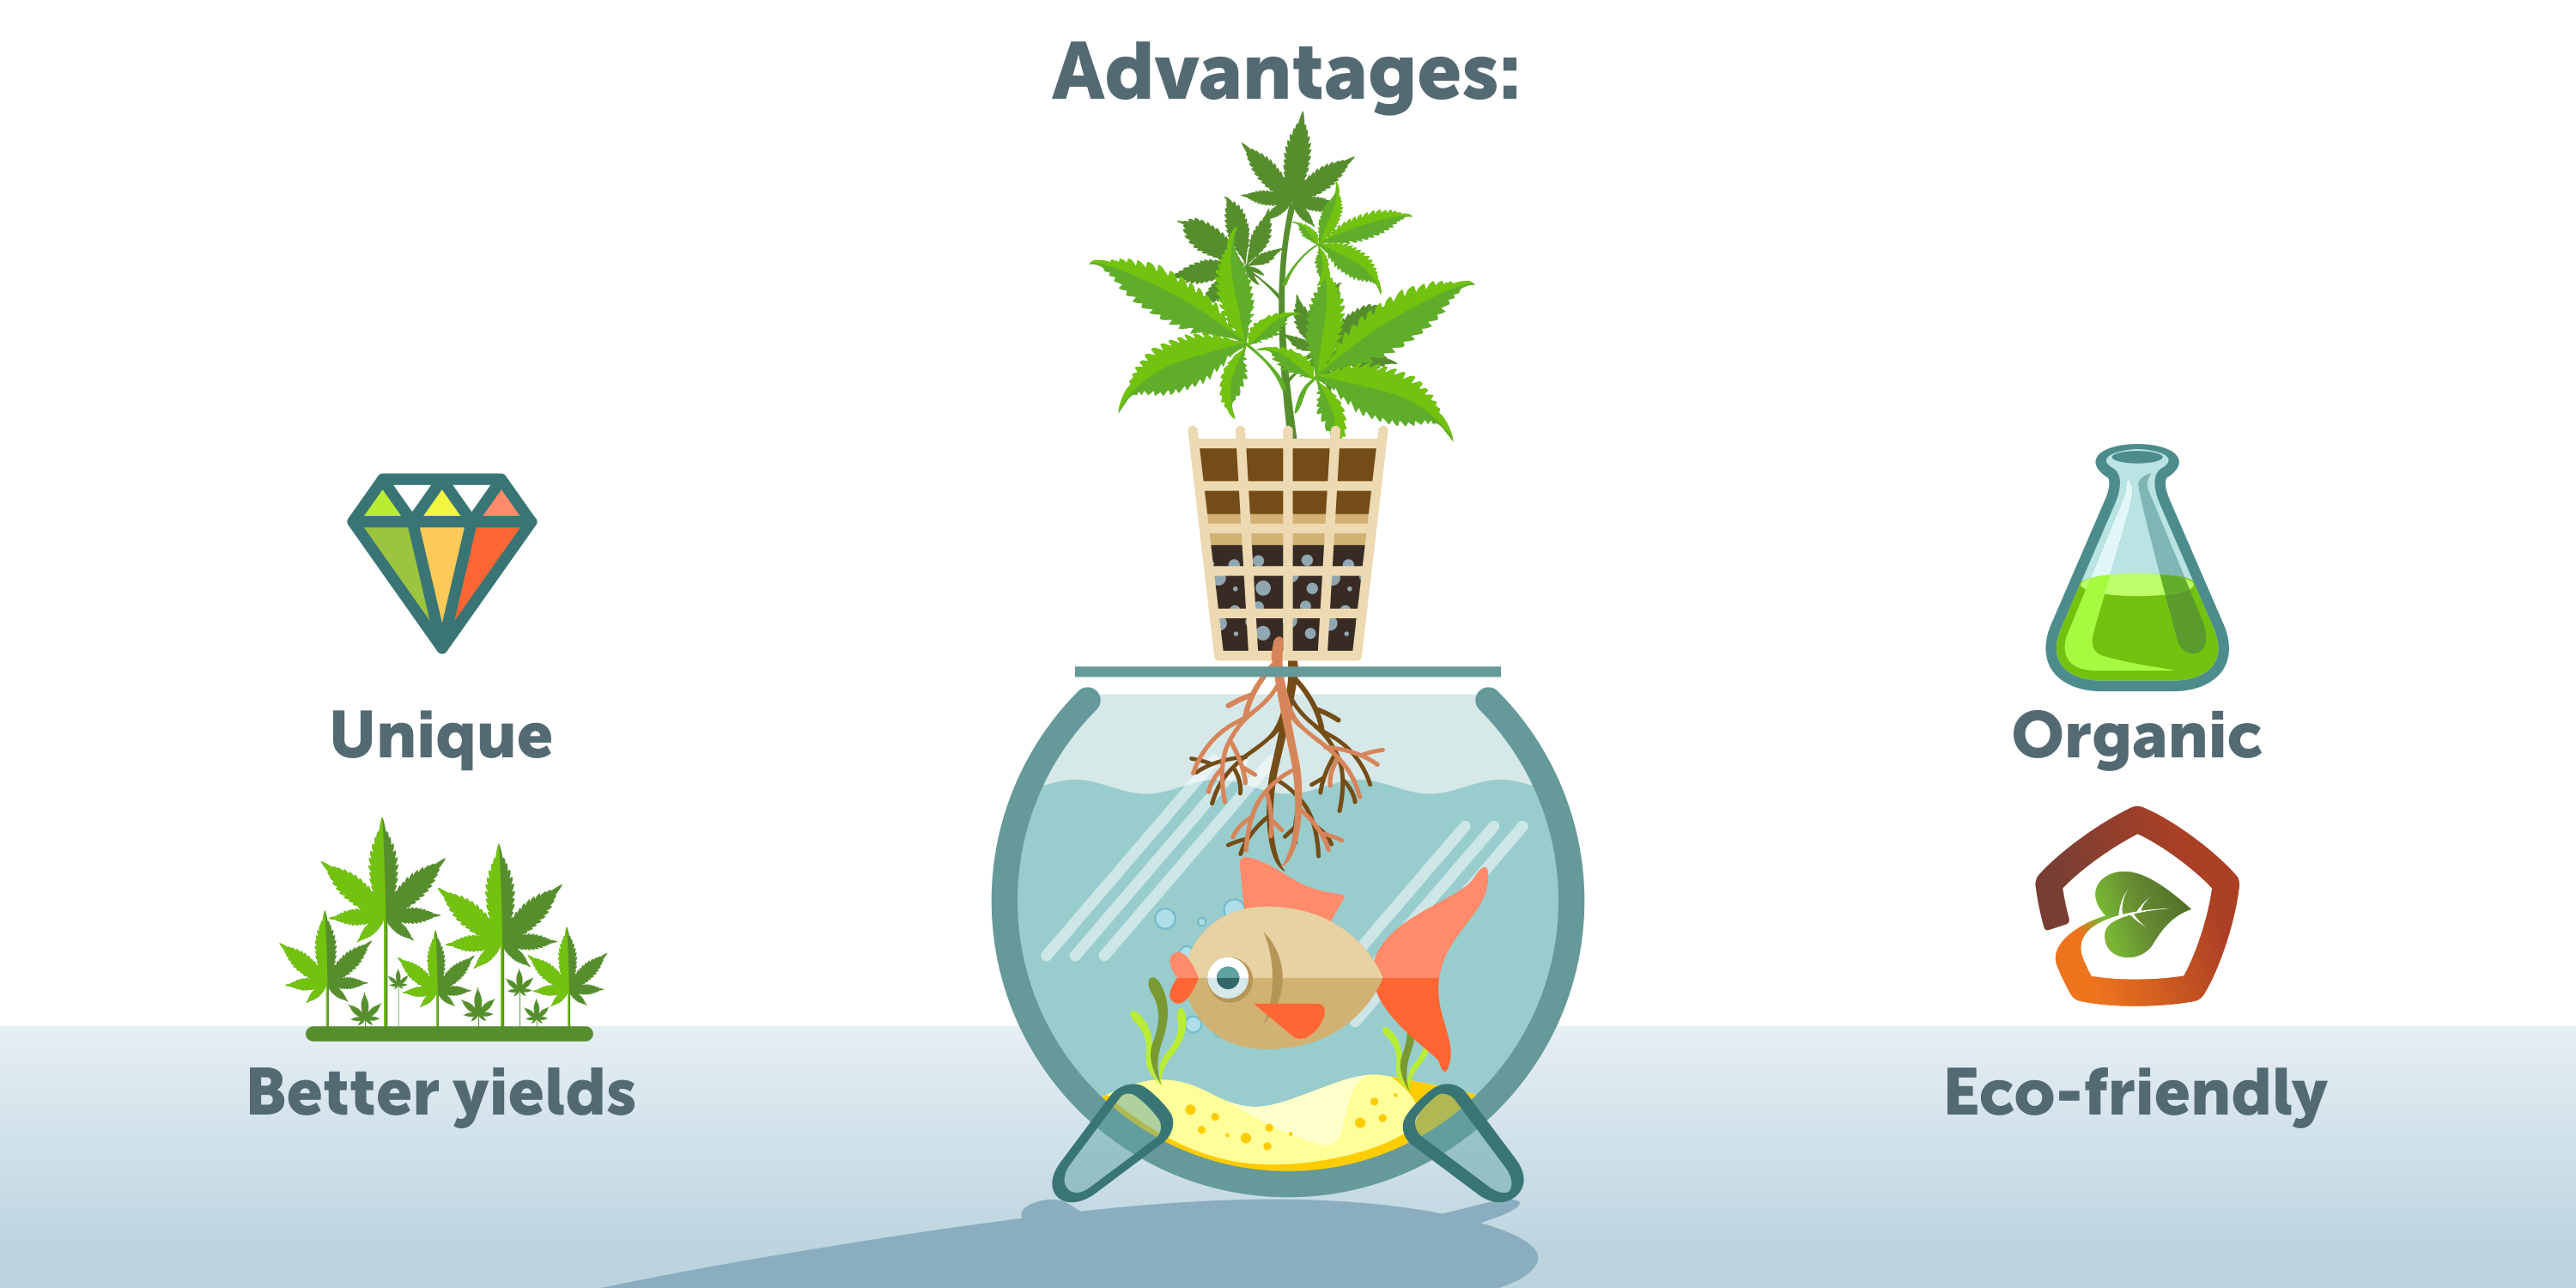 Pros Of Growing Cannabis With An Aquaponics System